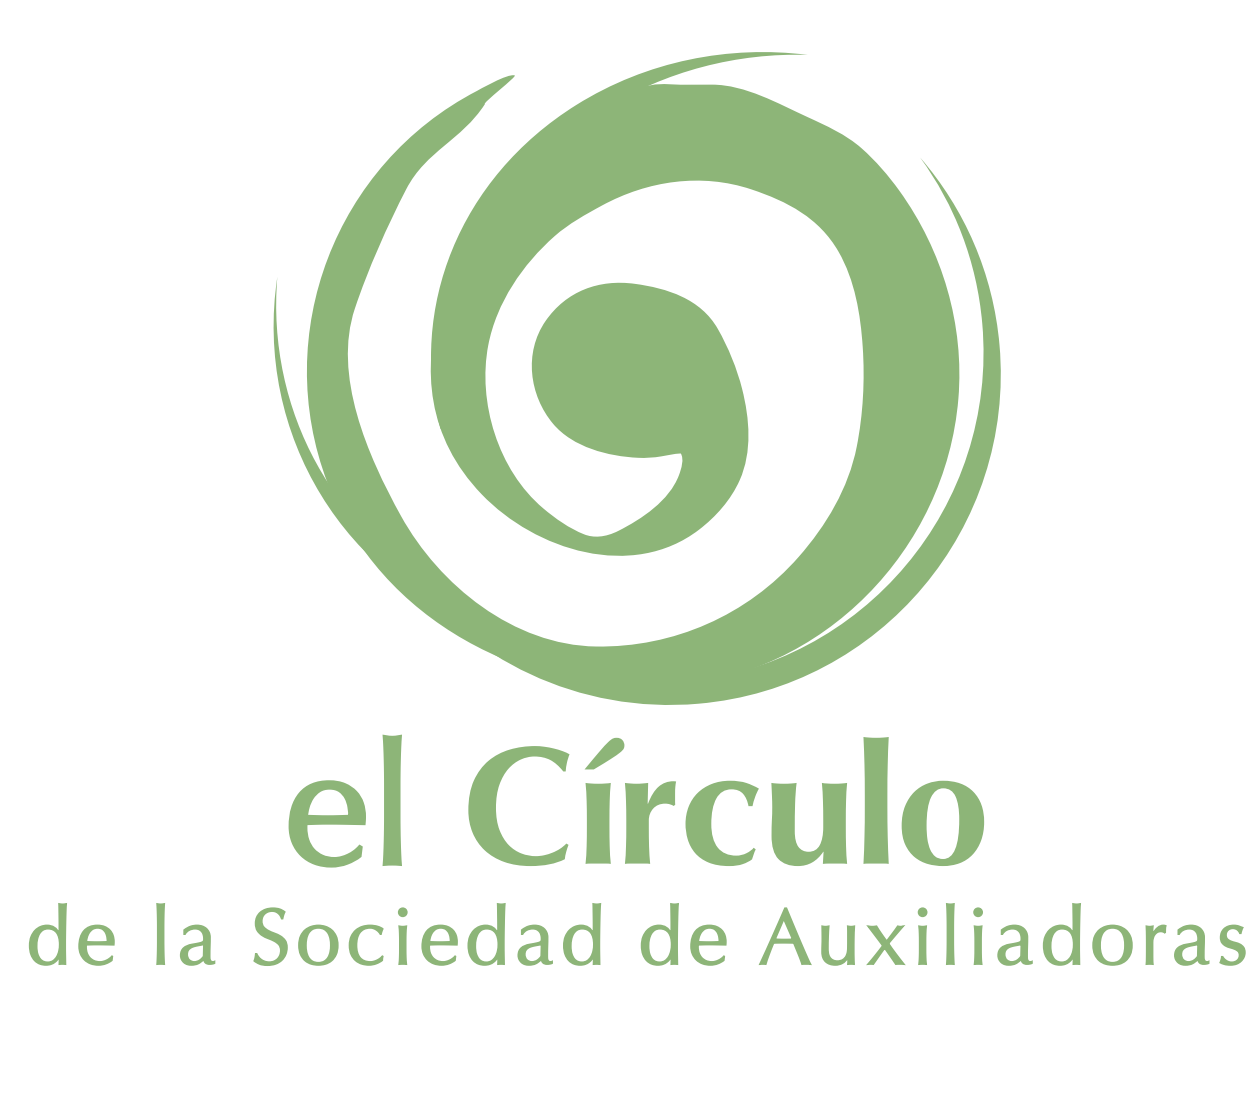 The Circle Resource Center